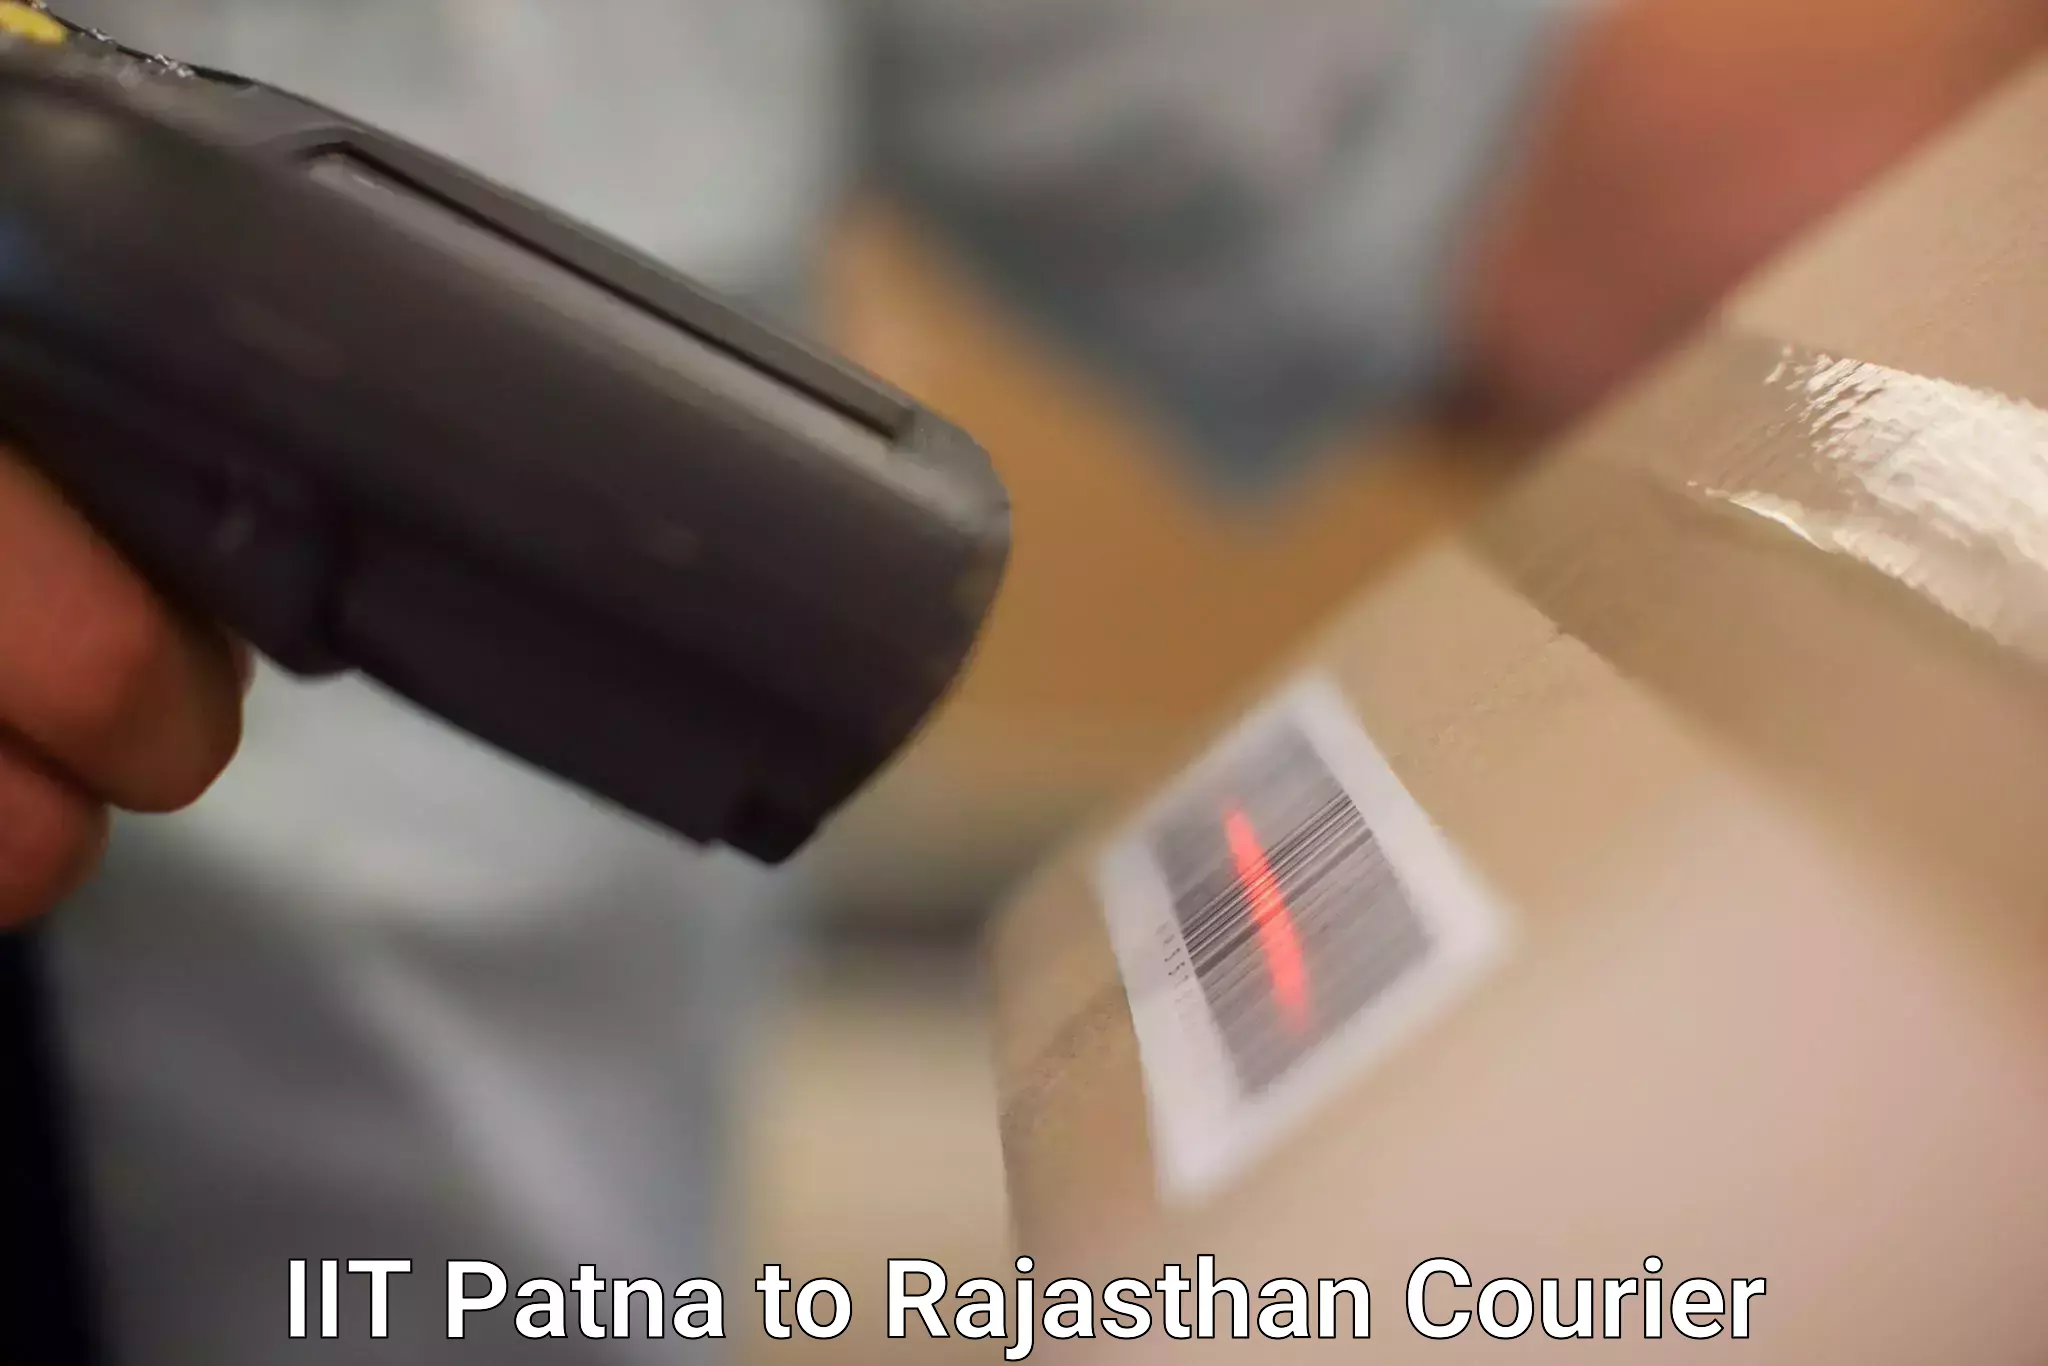 User-friendly courier app IIT Patna to Rajasthan